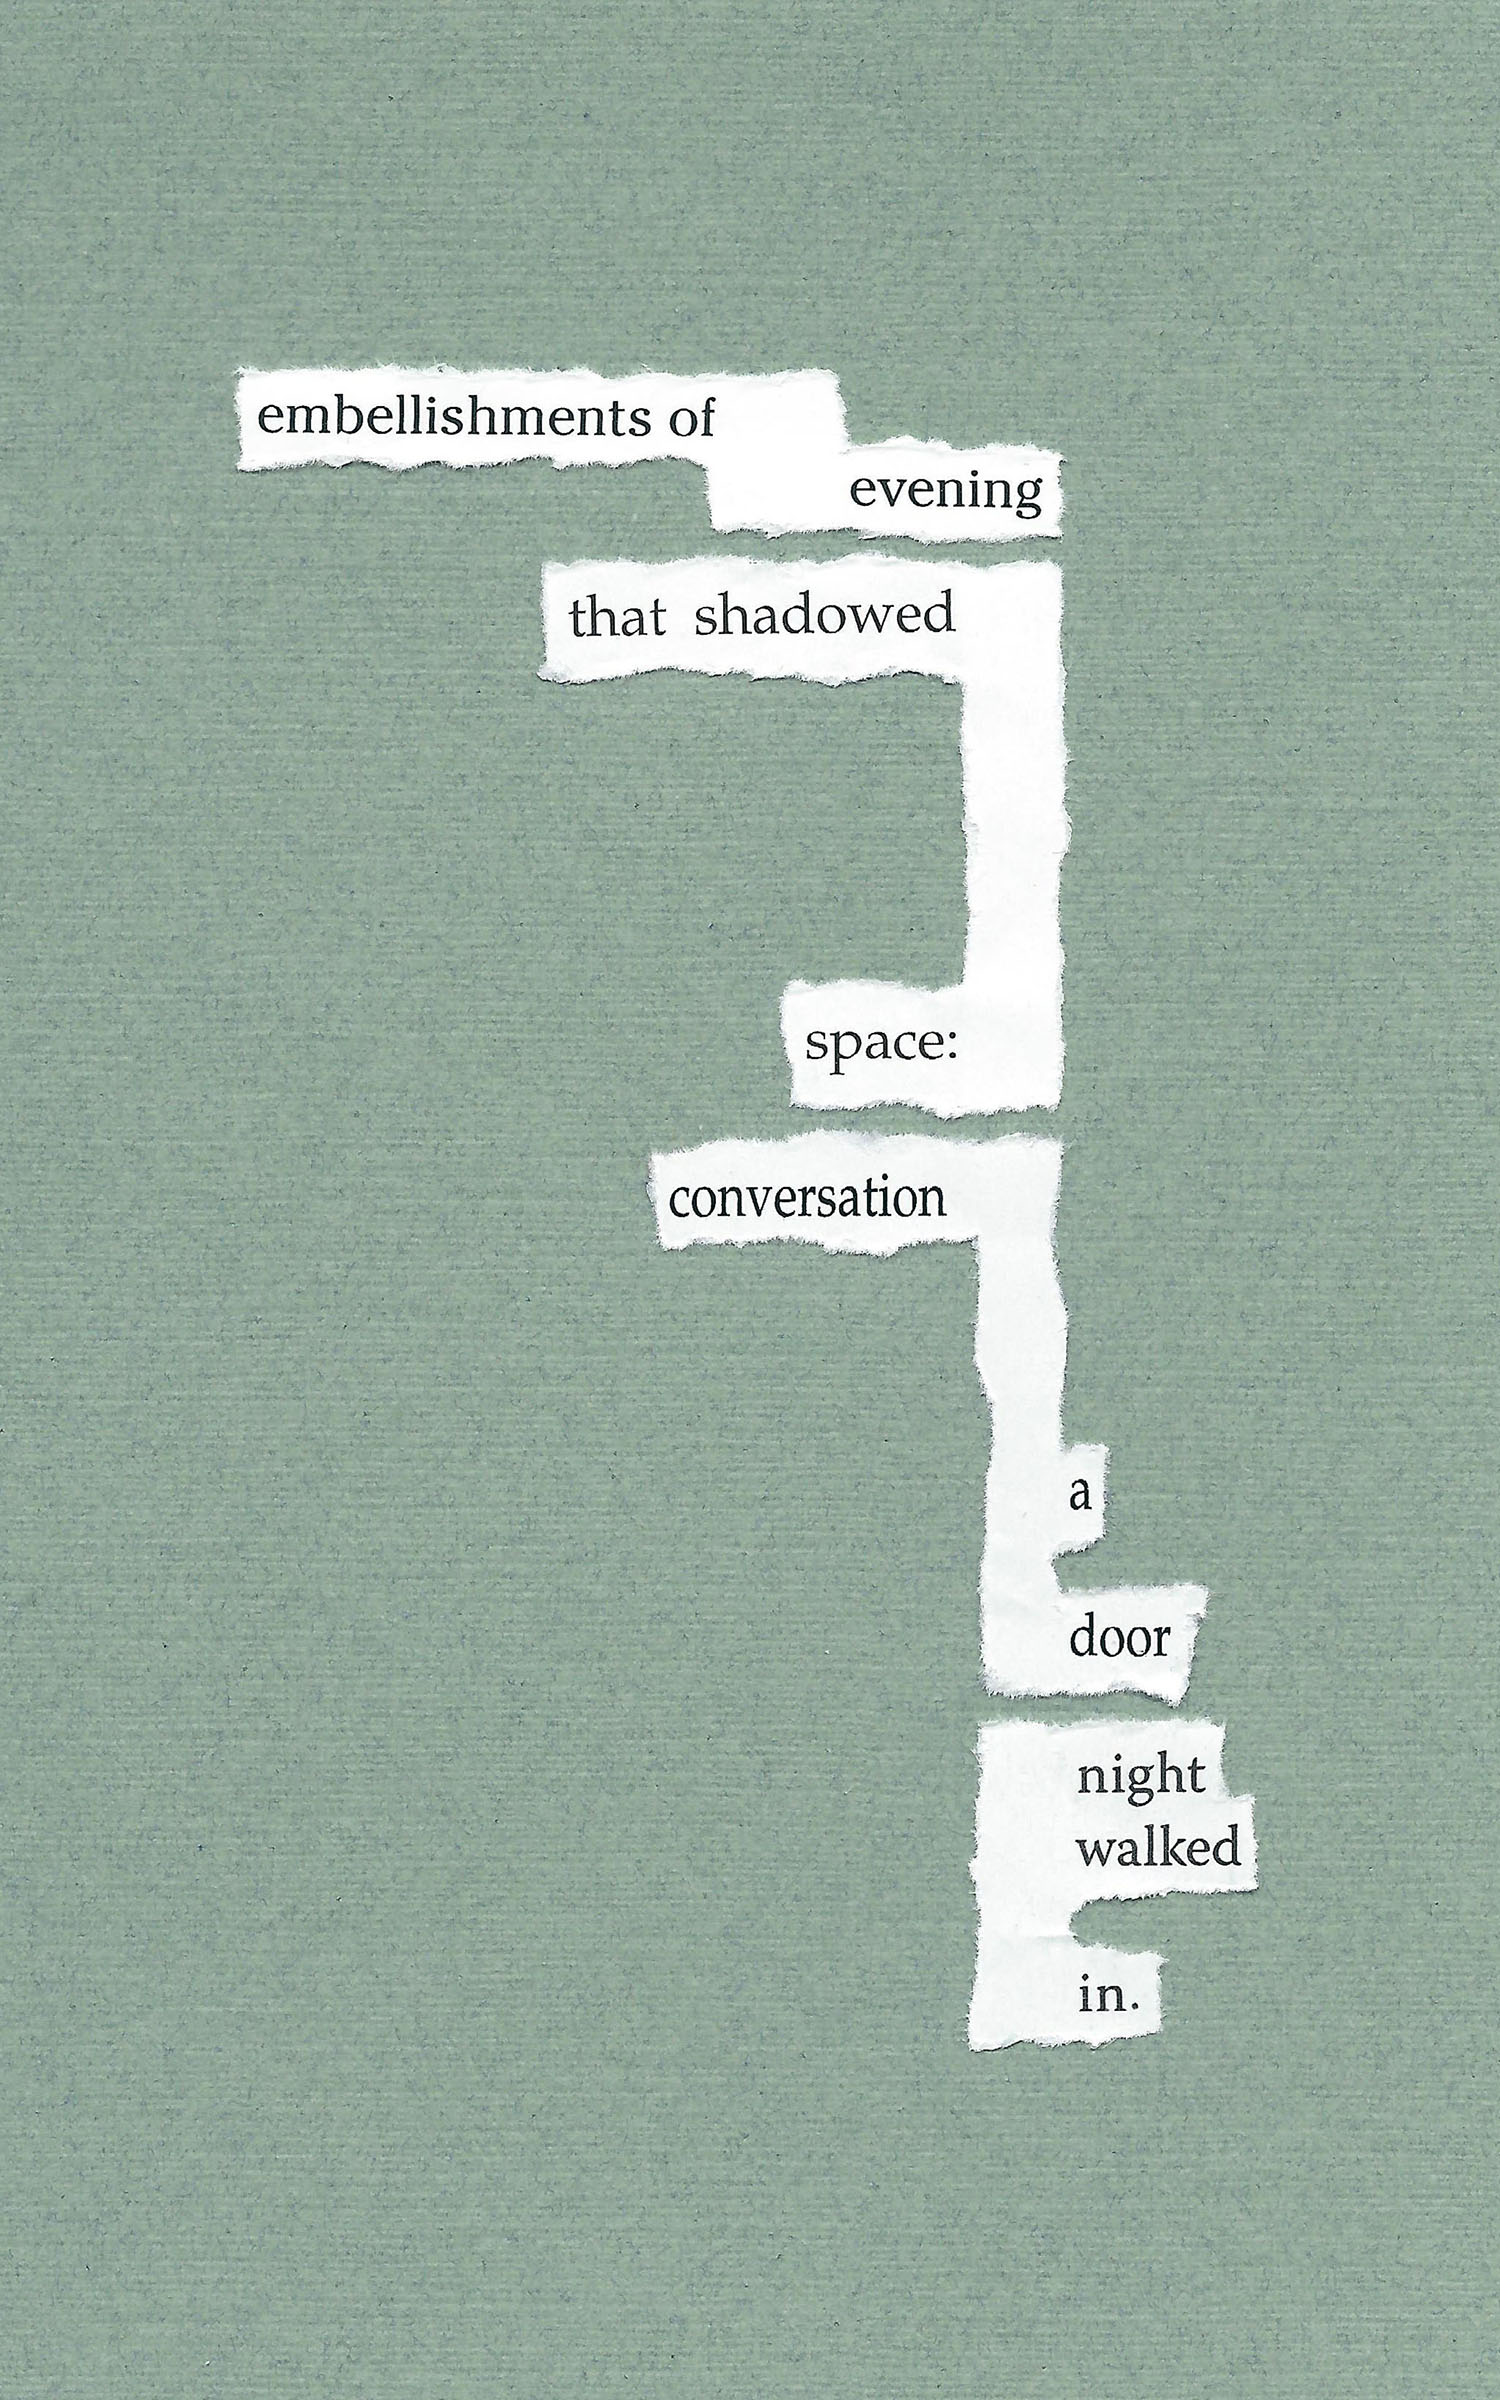 cutout words that make up the poem embellishments of evening 
        			that shadowed space conversation a door night walked in